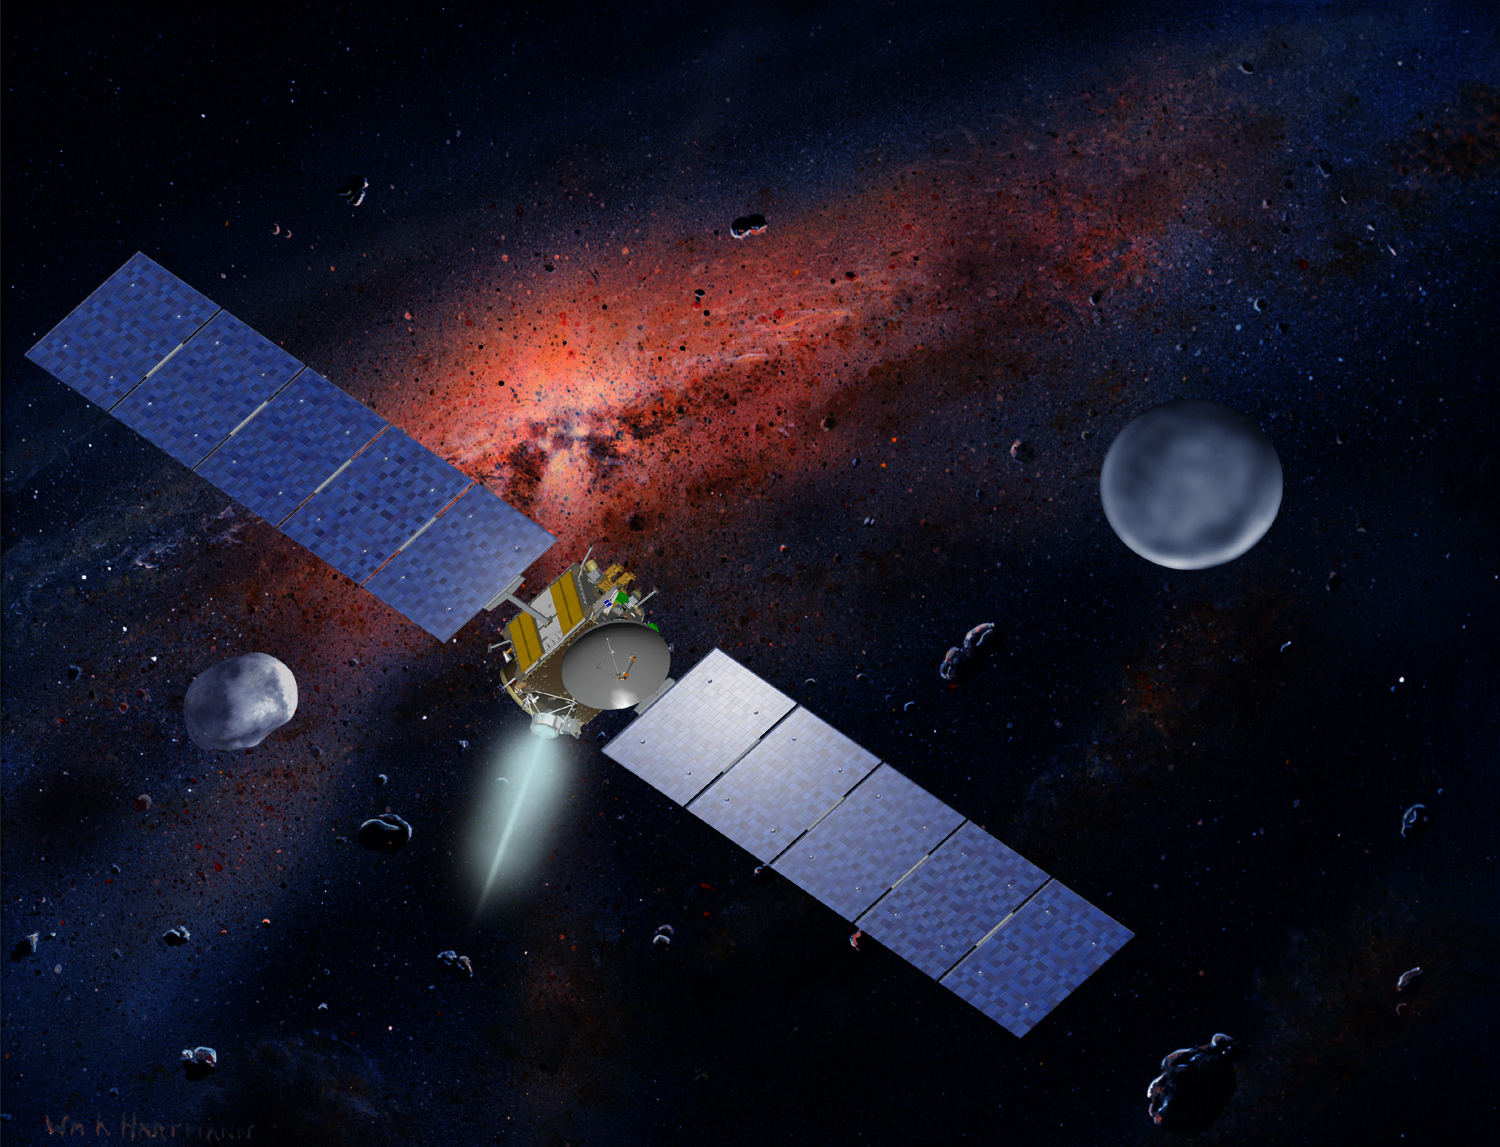 Artist's concept of NASA's Dawn spacecraft between the giant asteroid Vesta and the dwarf planet Ceres